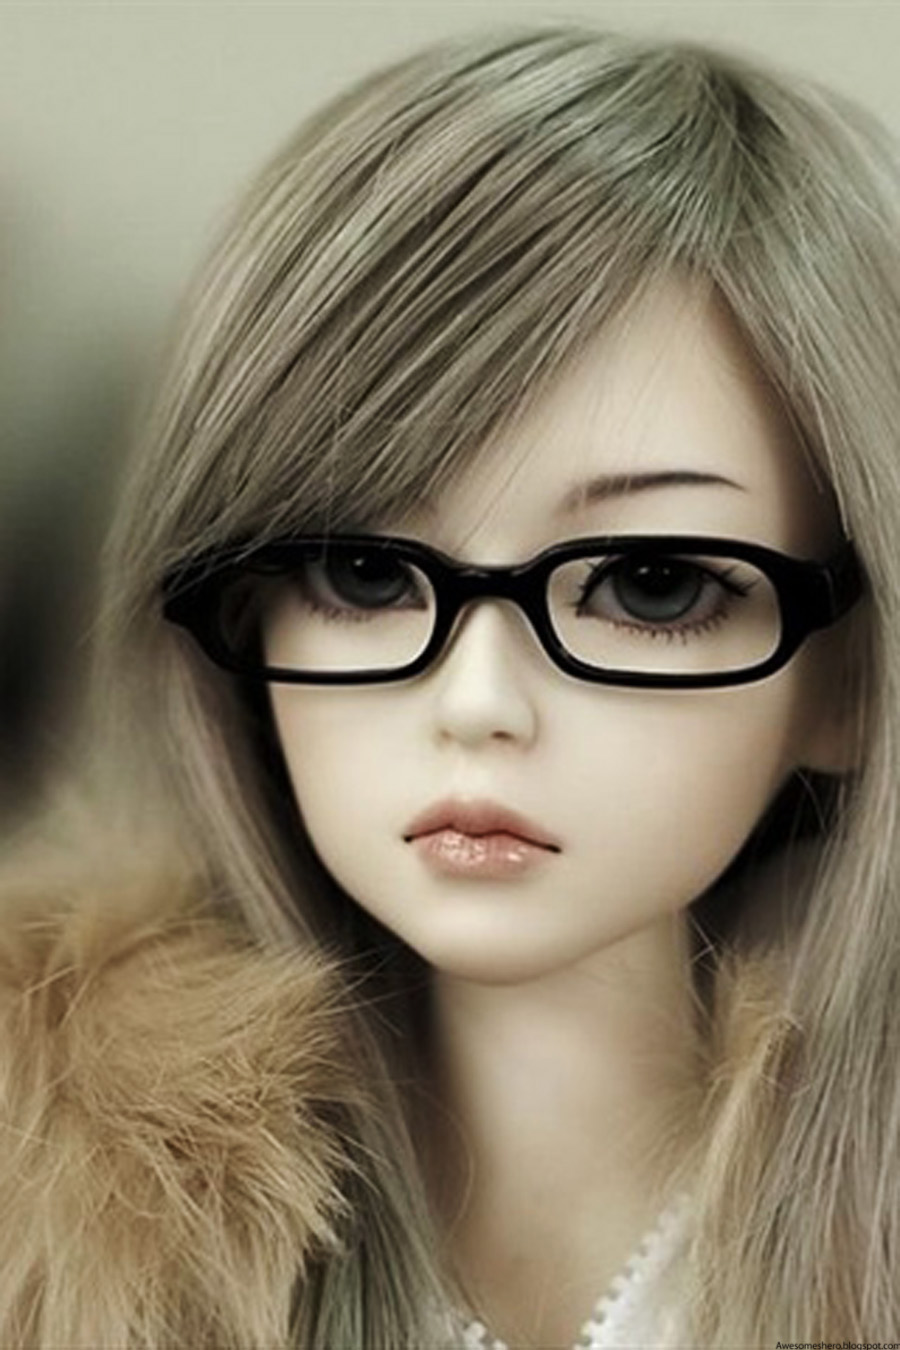 Cute doll faces - raads Photo - Cute-doll-faces-raads-37221312-900-1350